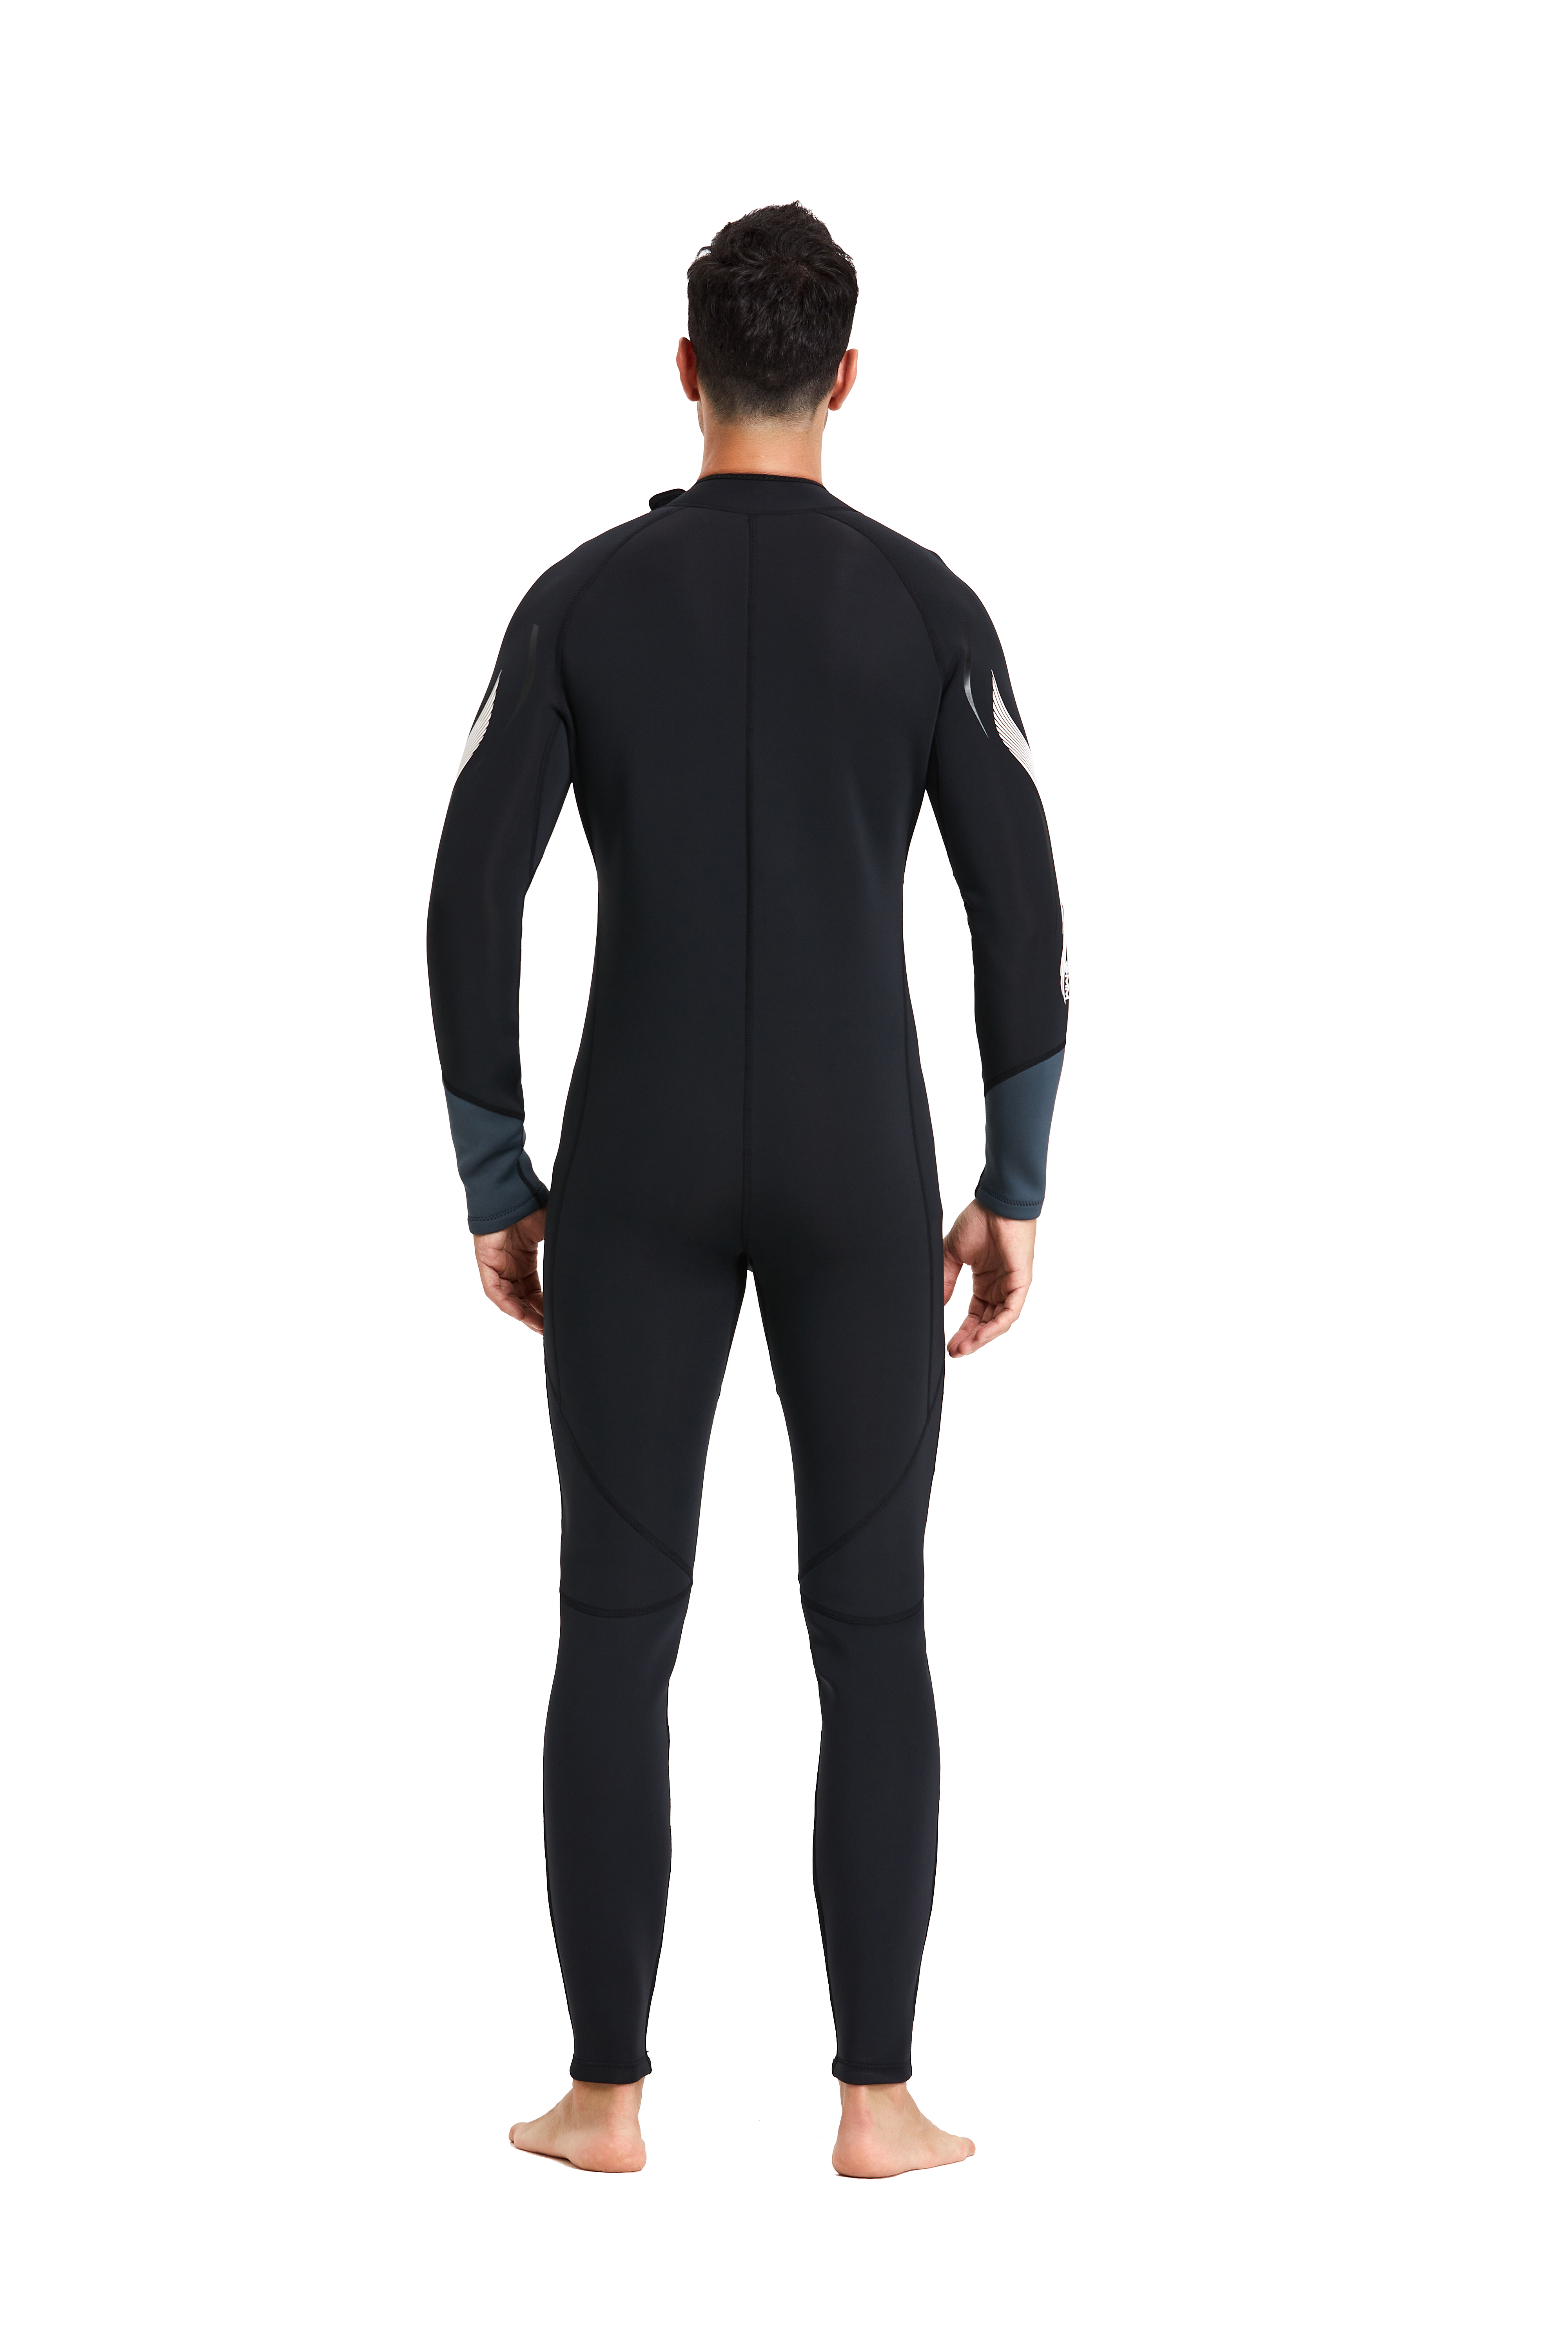 Customized High Quality Full Body Keep Warm Long Sleeve Snorkeling Surfing Suit Yamamoto 3Mm Neoprene Men Diving Wetsuit